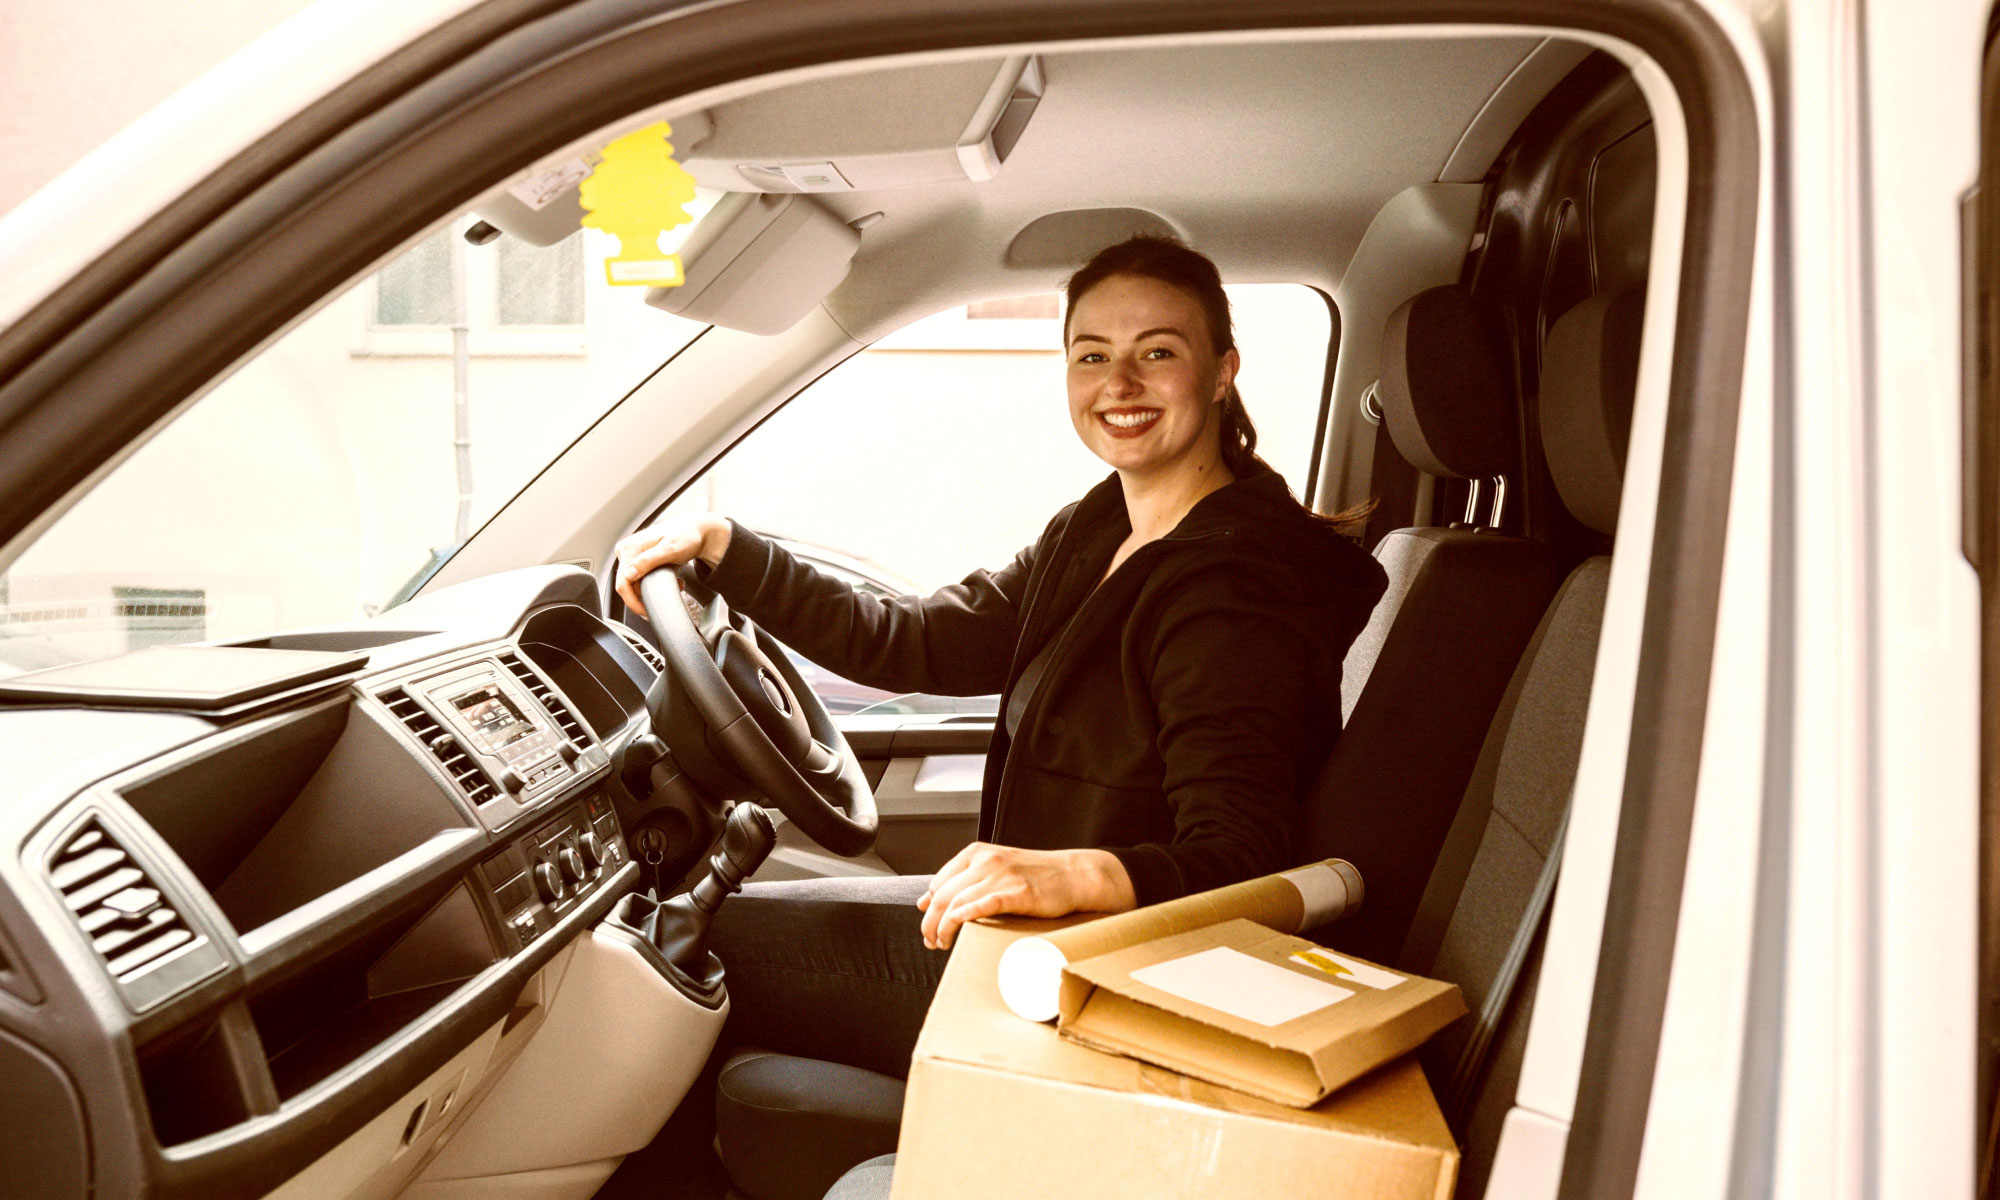 Woman smiling while sitting in the driver's seat of a white van with some parcels in the foreground